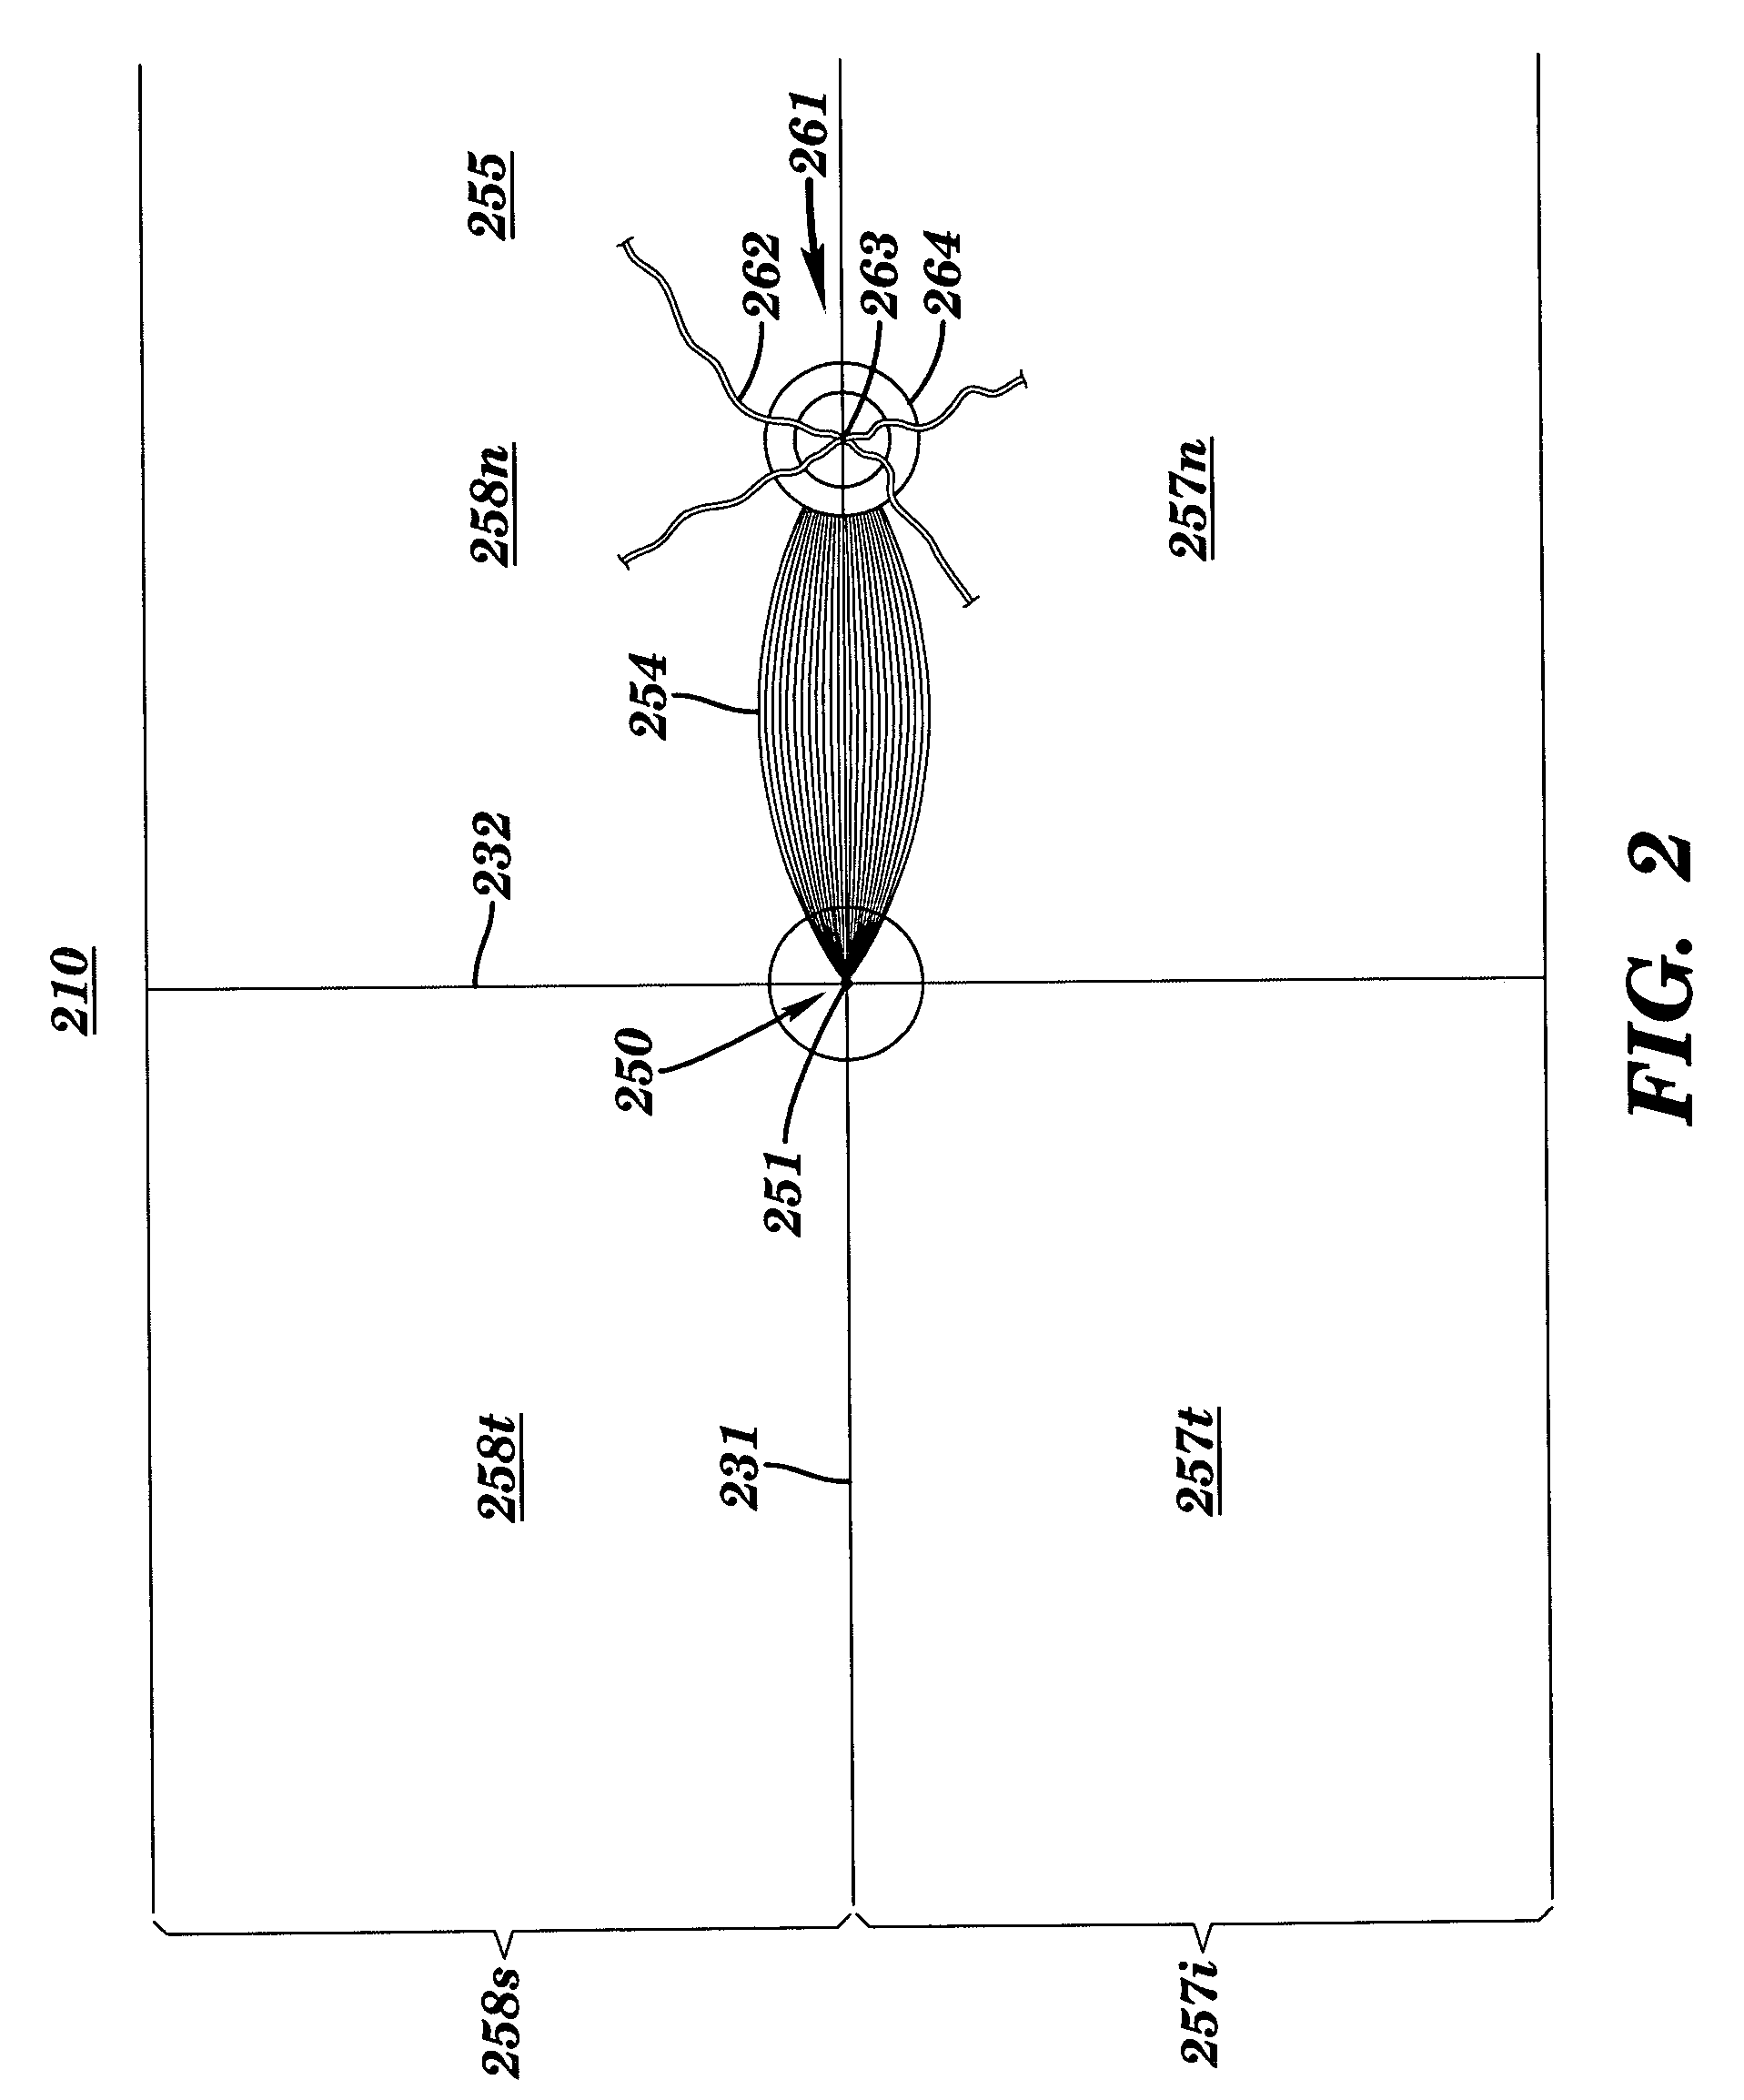 Apparatus and method for assessing retinal damage